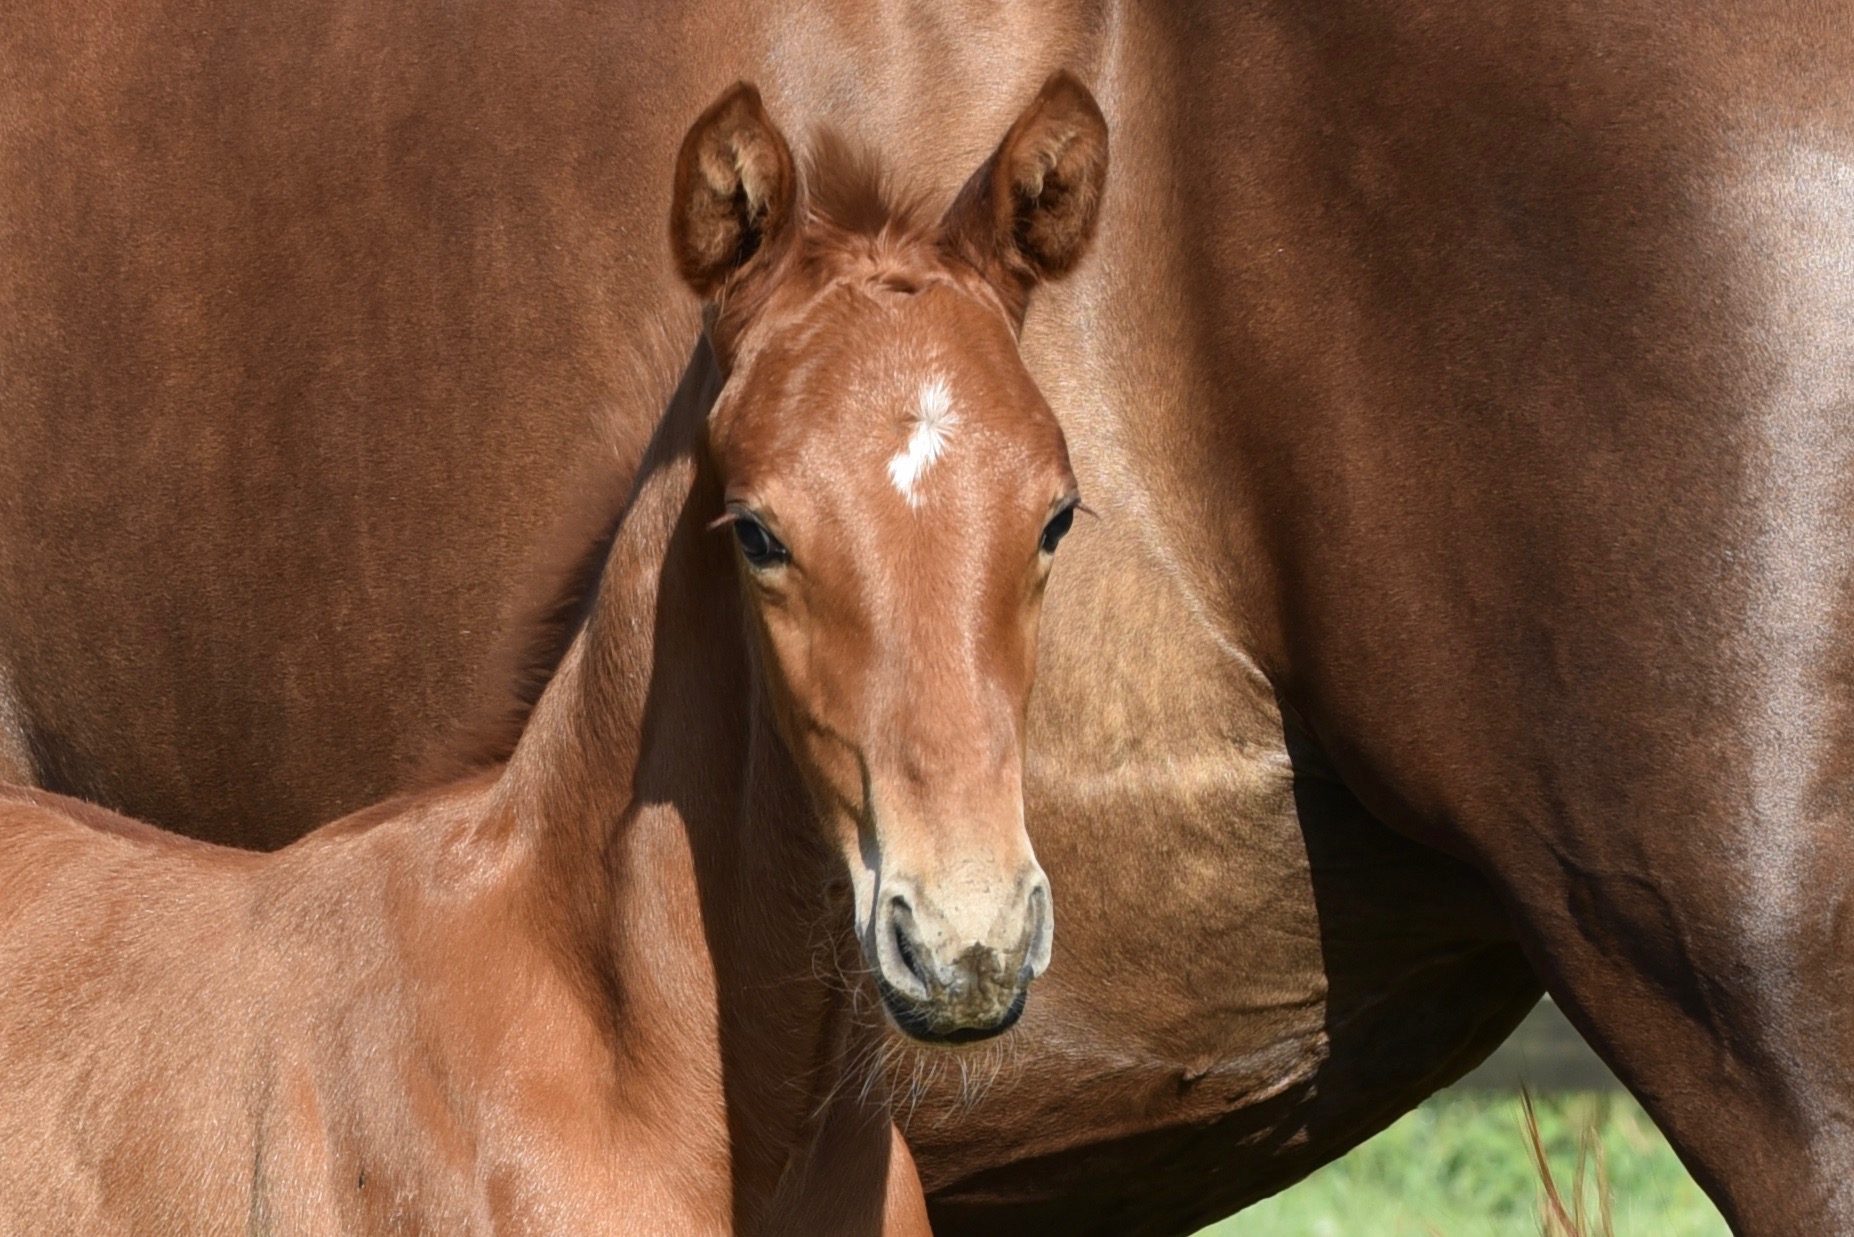 New foals have arrived!